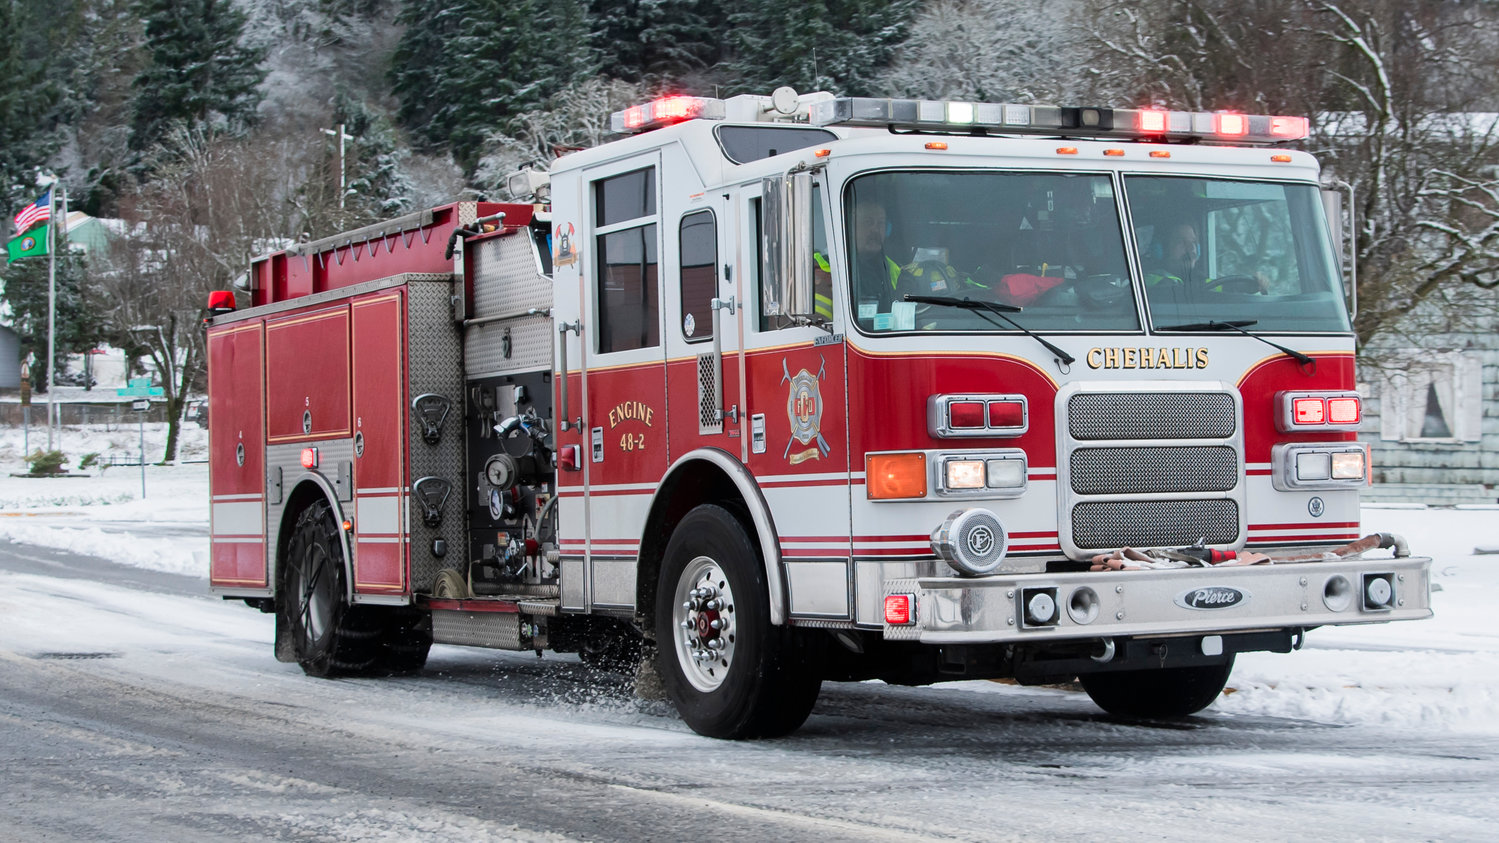 A fire engine drives through downtown Chehalis with lights illuminated Sunday morning.